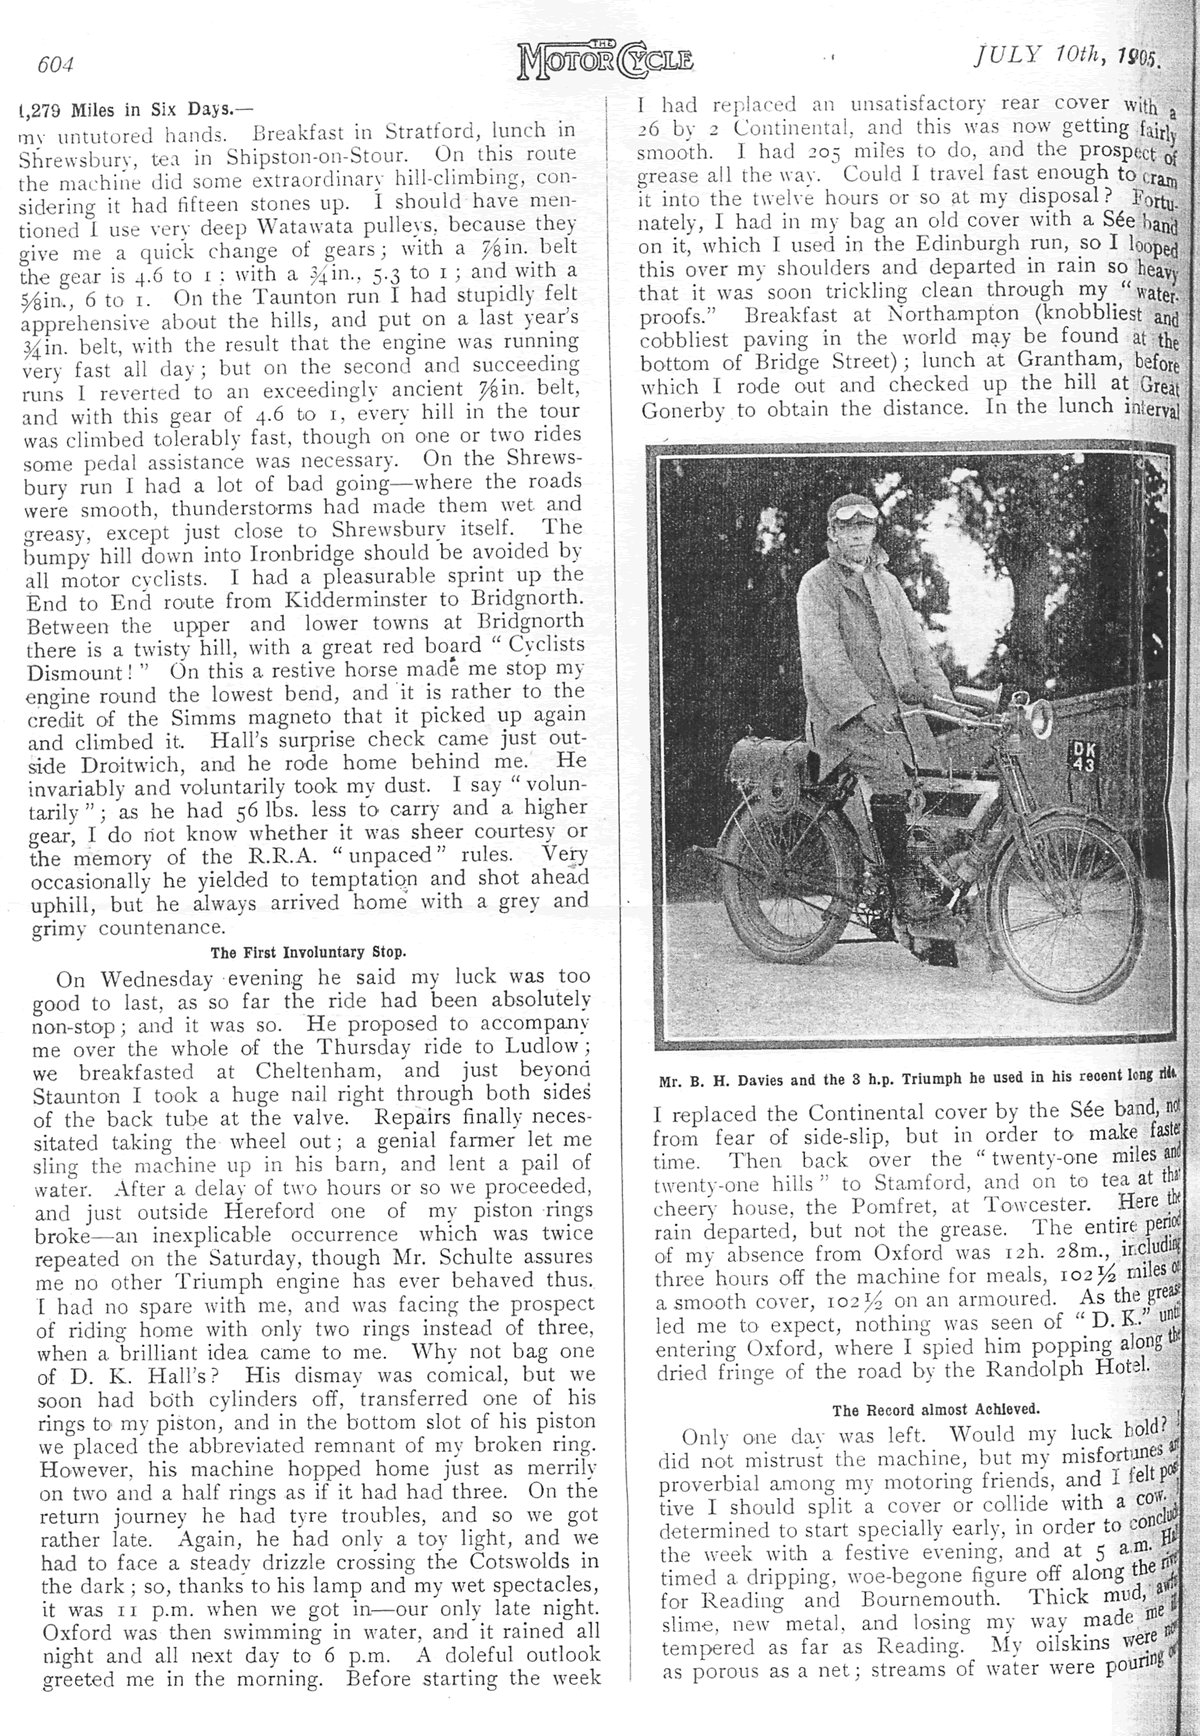 ixion 1905 article page 2